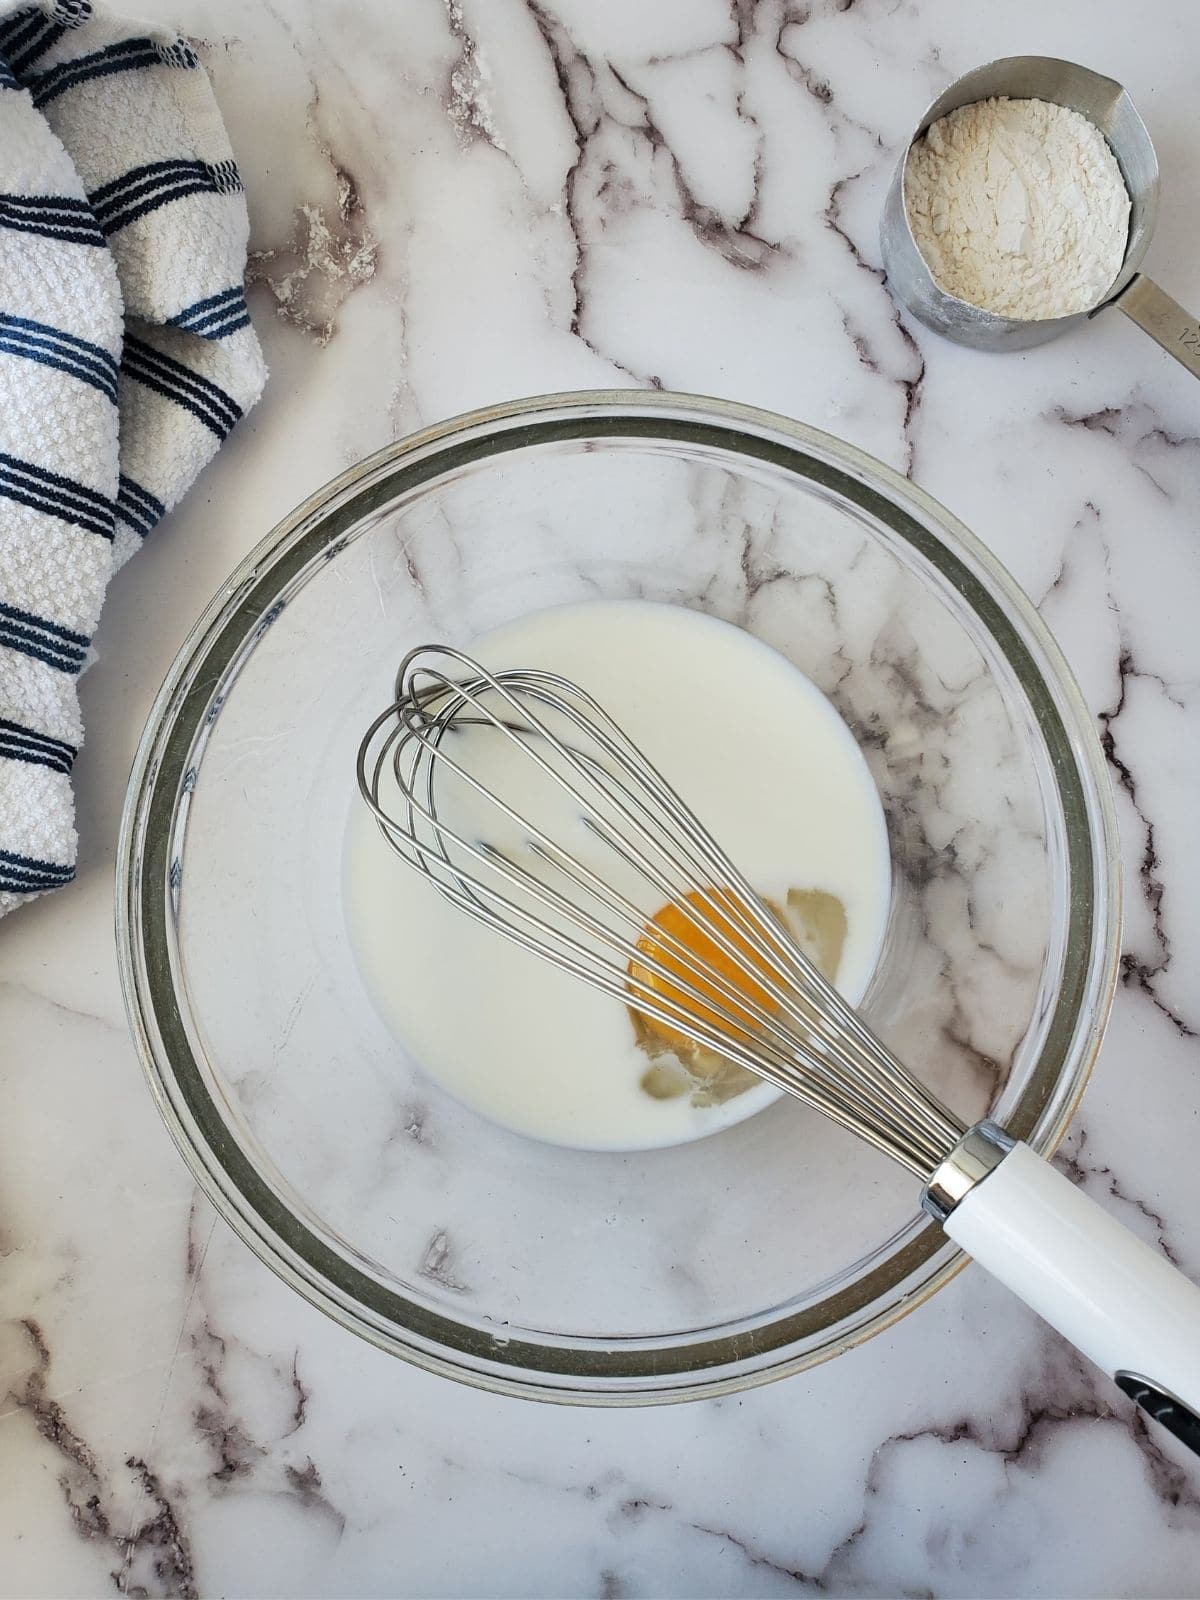 A glass mixing bowl with milk and an egg are in the center of the photo with a white and blue striped linen in the left hand corner. In the right hand corner there is a measuring cup with some white flour in it.